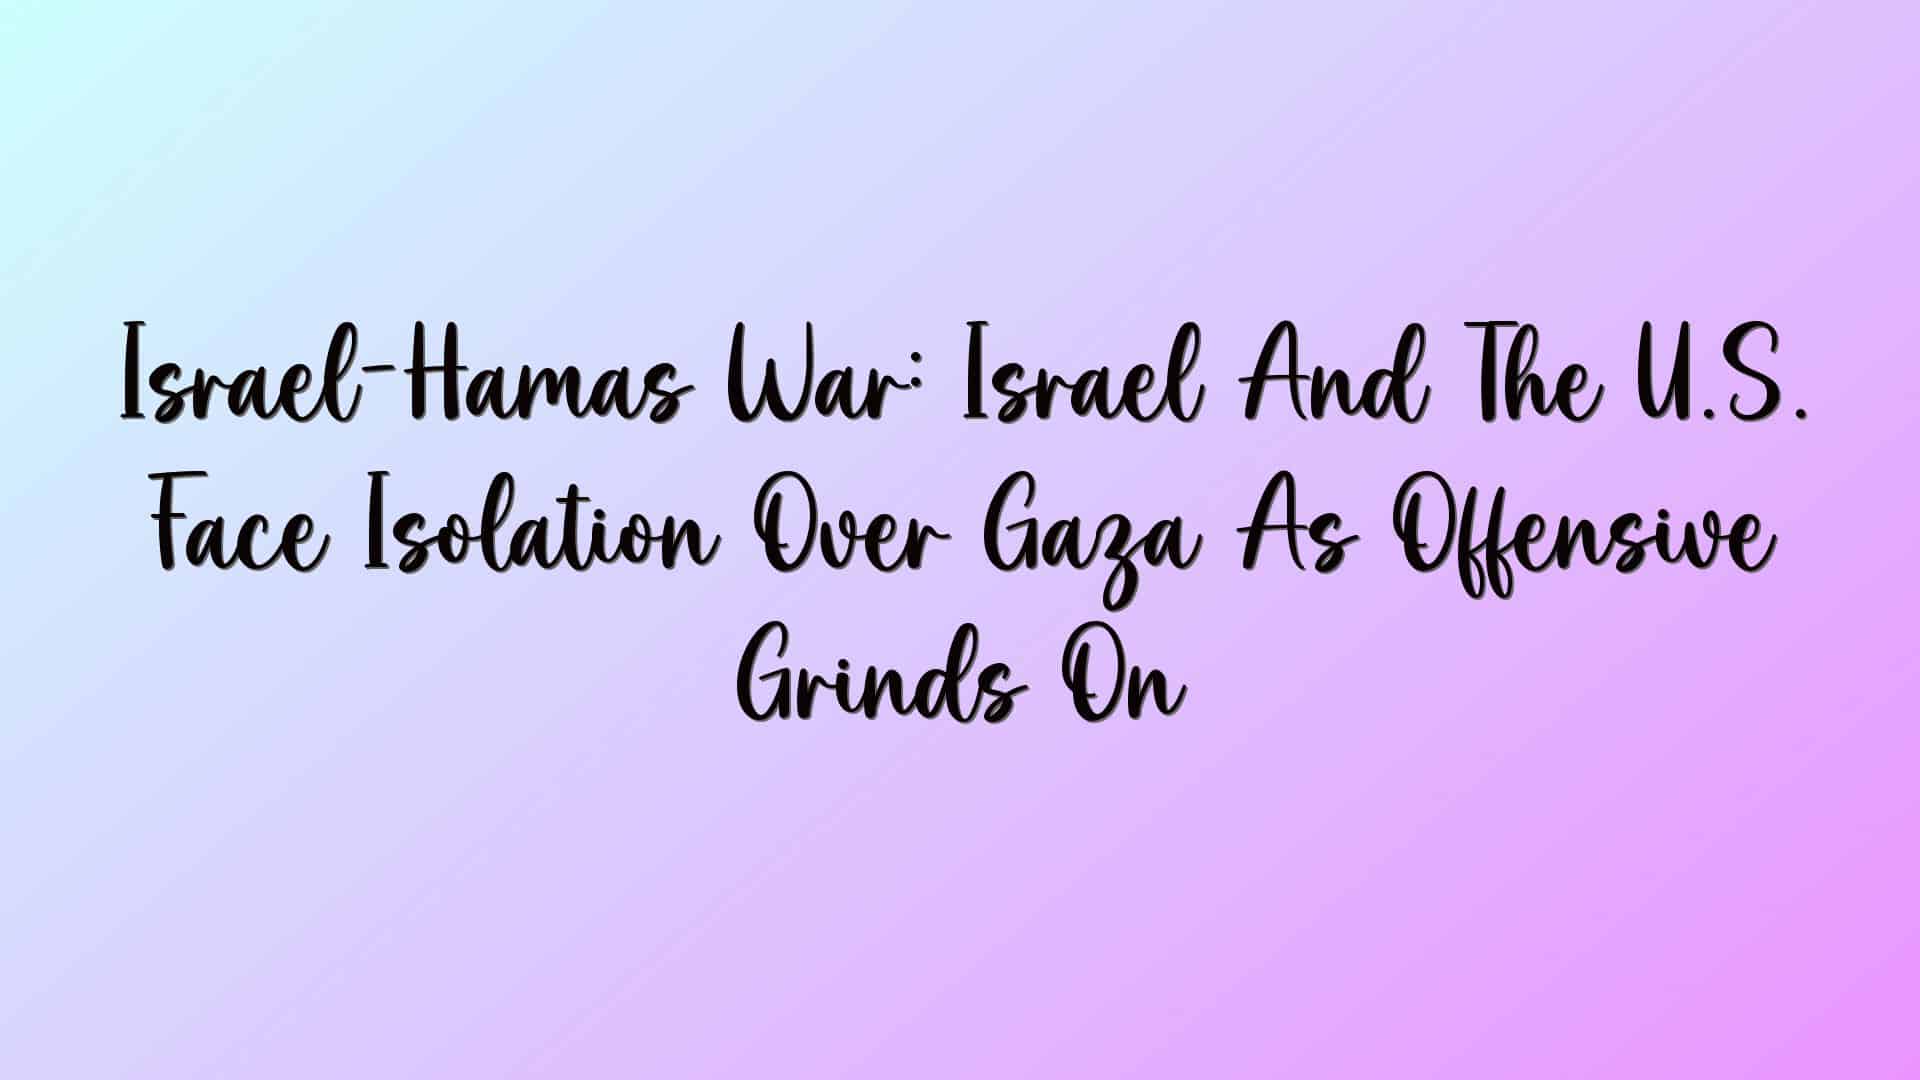 Israel-Hamas War: Israel And The U.S. Face Isolation Over Gaza As Offensive Grinds On